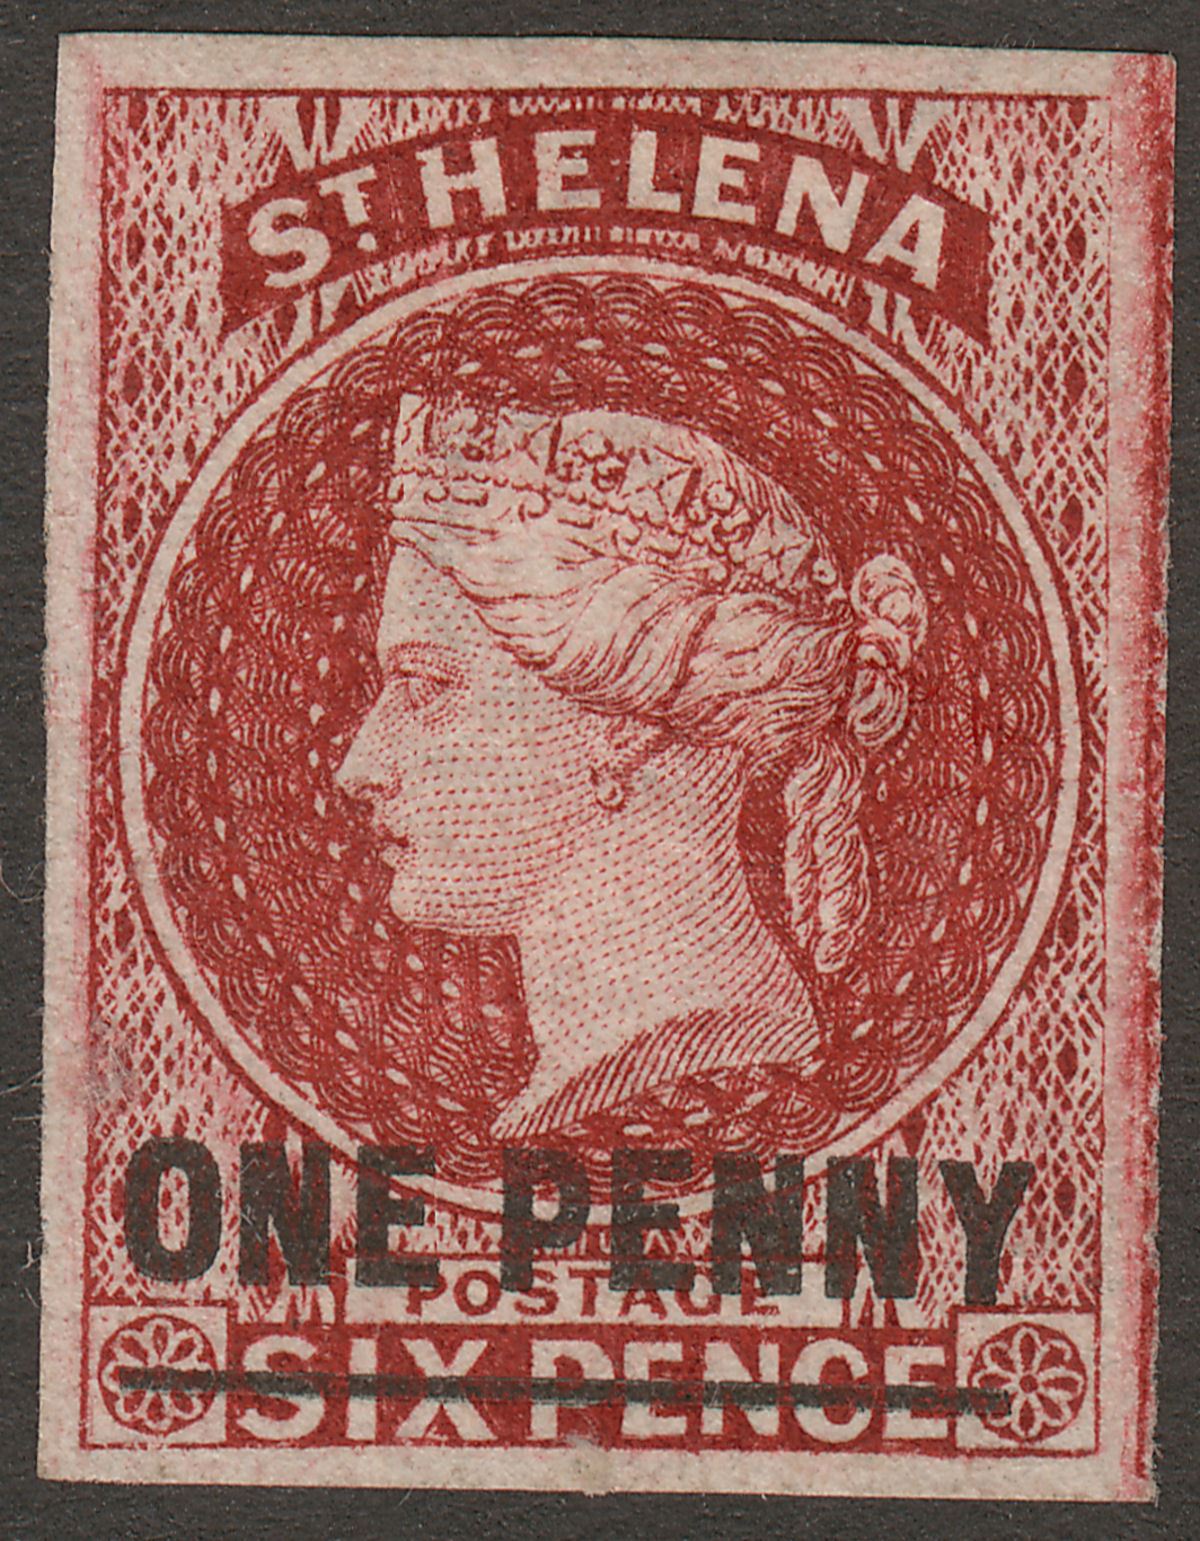 St Helena 1863 QV 1d Lake type A Imperf Unused SG3 four margins cat £150 as mint